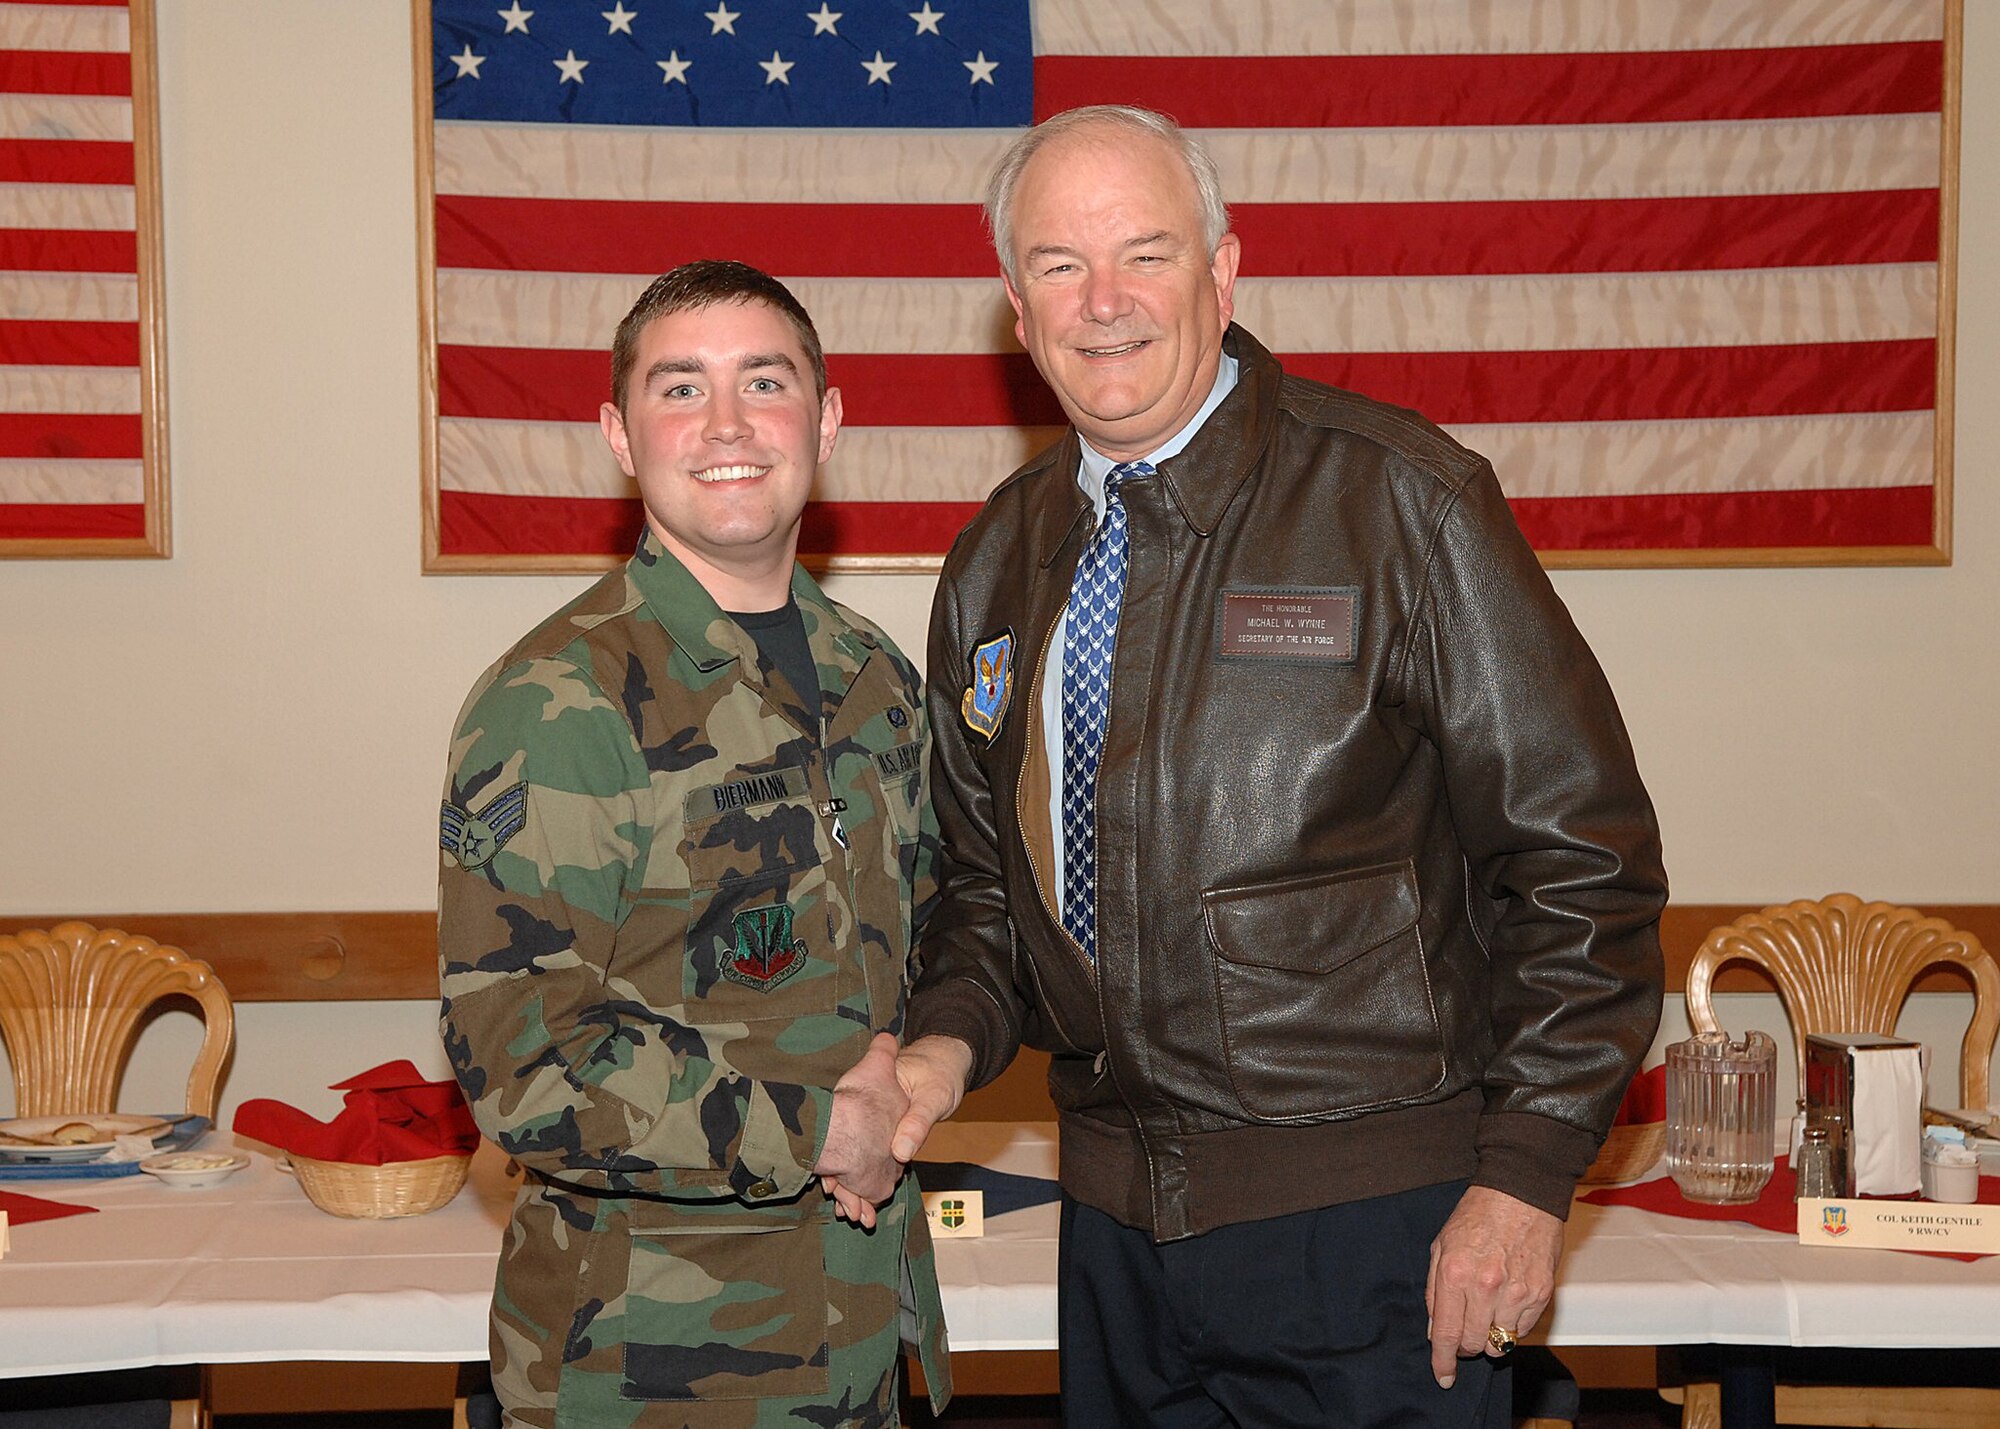 Then Senior Airman R.J. Biermann, 9th Reconnaissance Wing Public Affairs staff writer, shakes hands with former Secretary of the Air Force, Michael Wynne in the fall of 2007. Biermann gained 30 pounds from 2007 to 2008. (Courtesy photo)